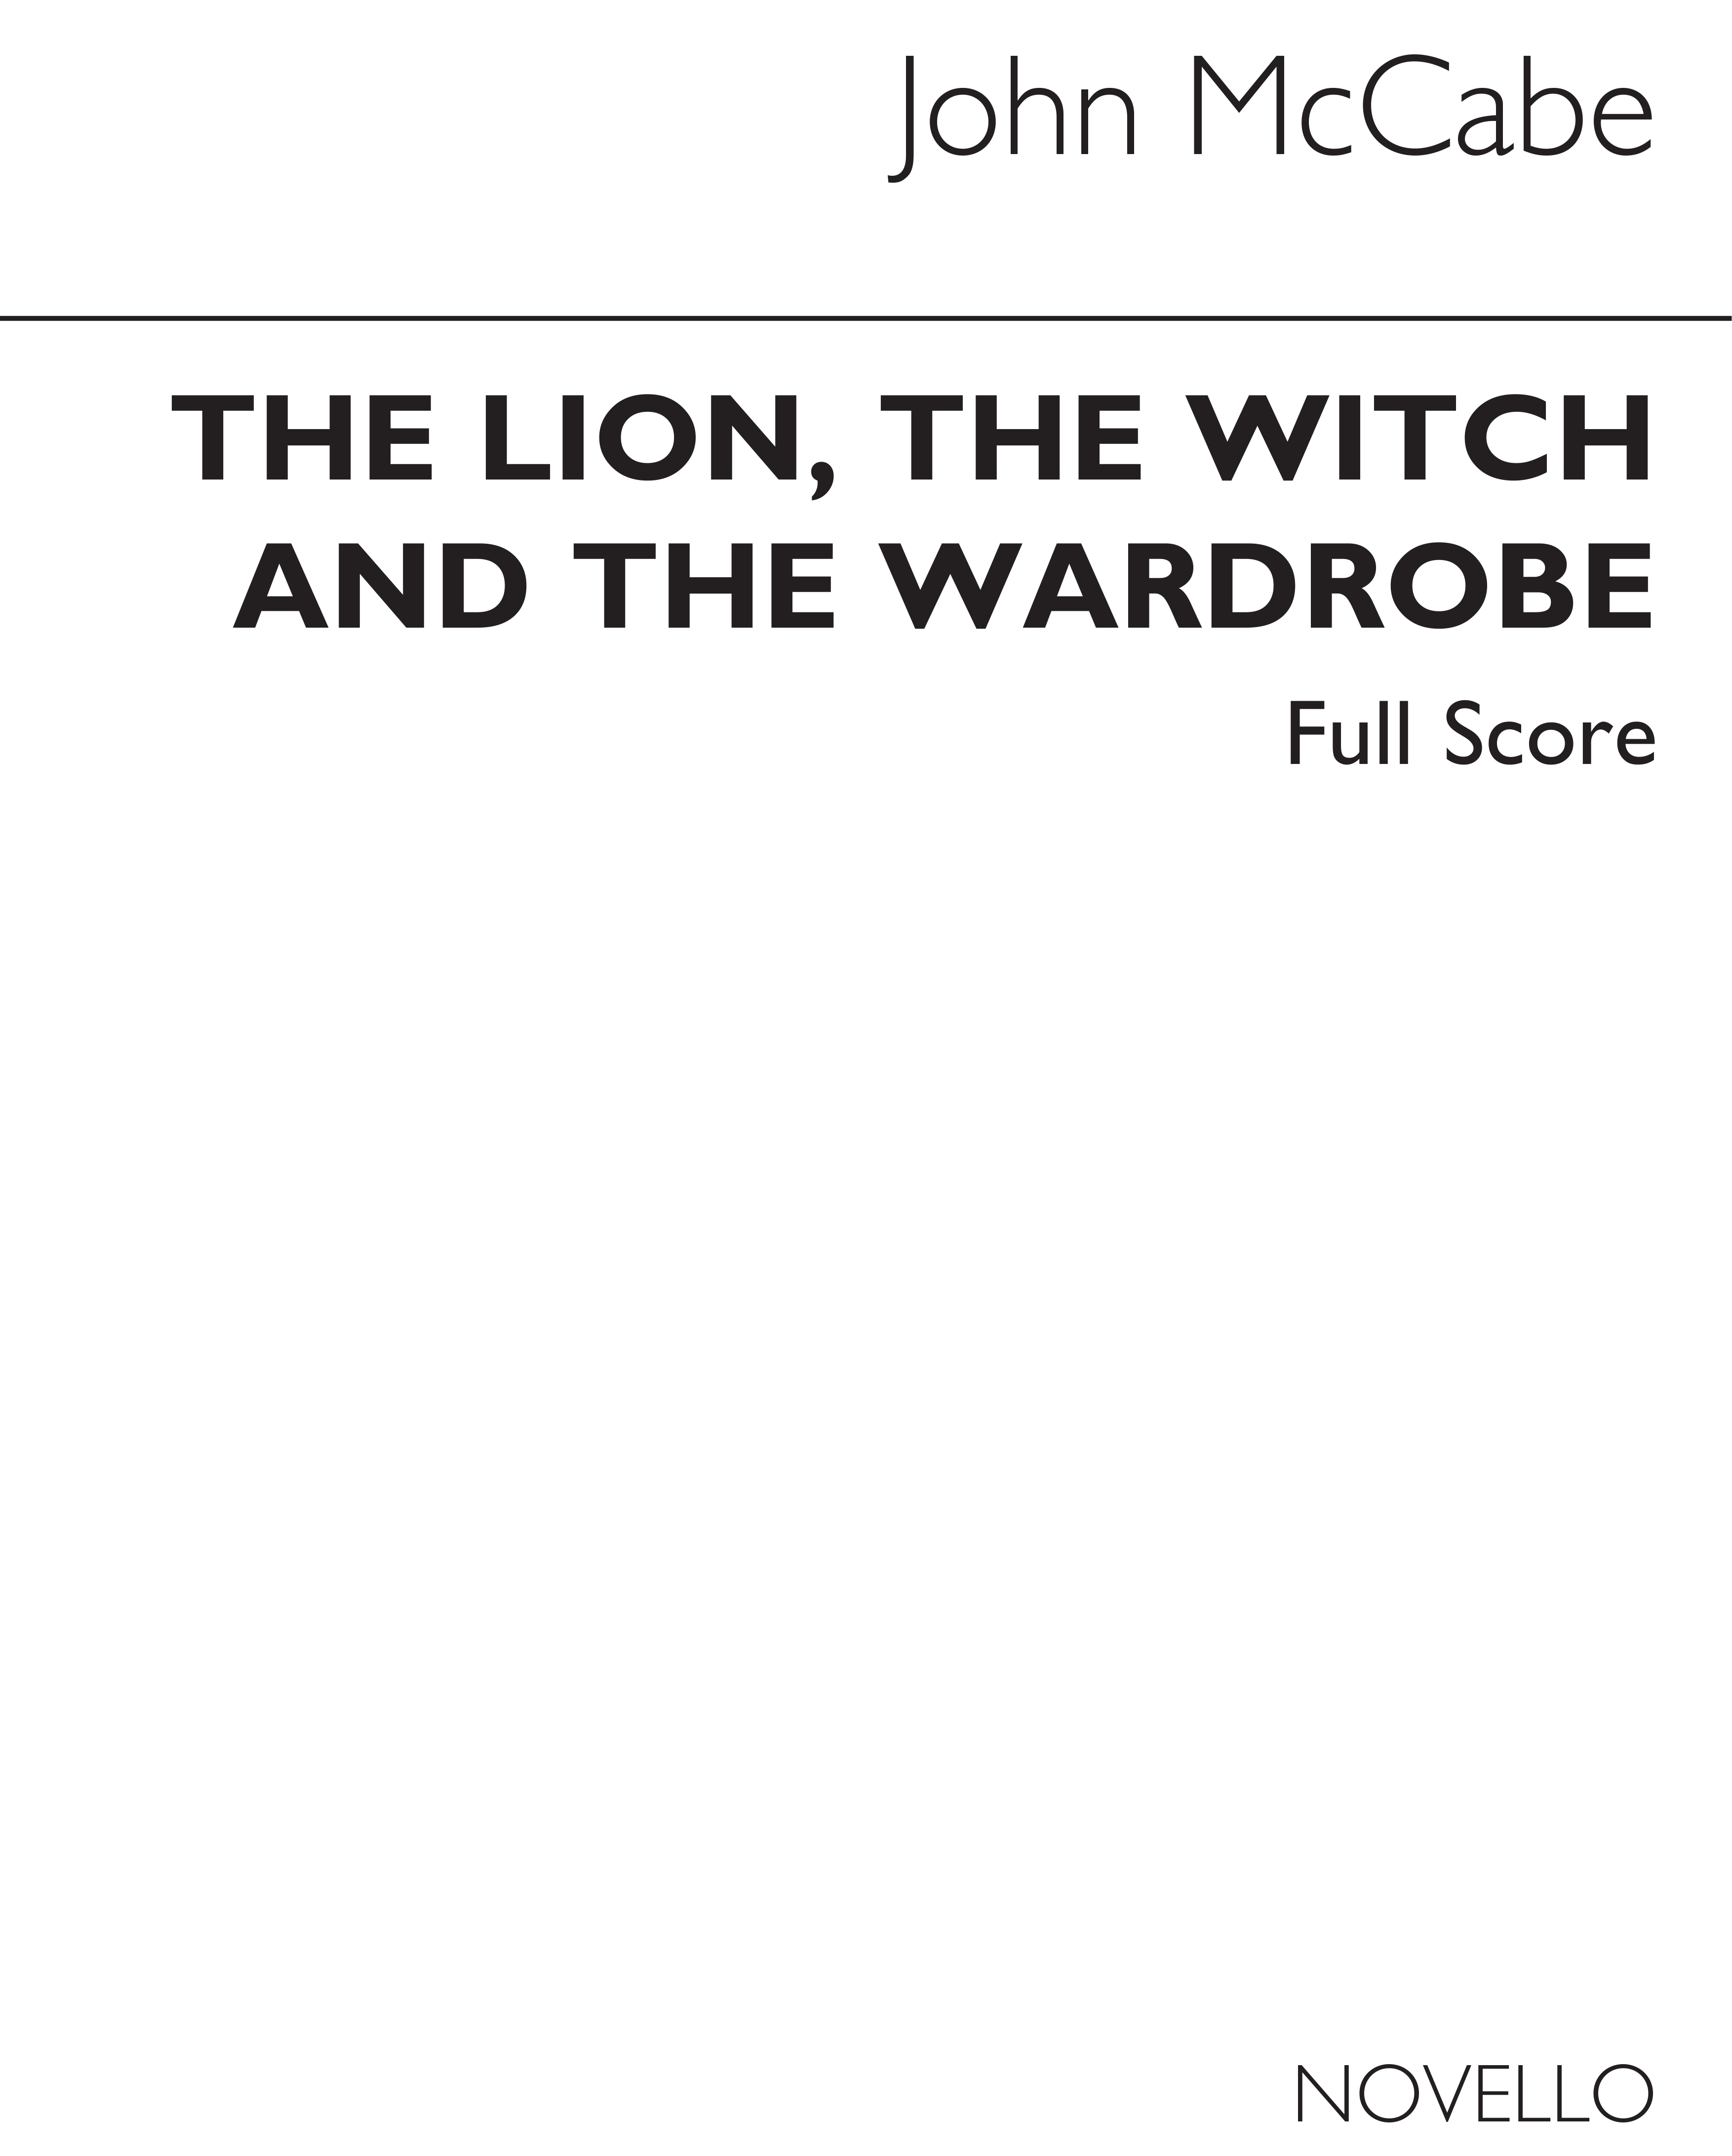 John McCabe: Suite From 'The Lion The Witch & The Wardrobe': Orchestra: